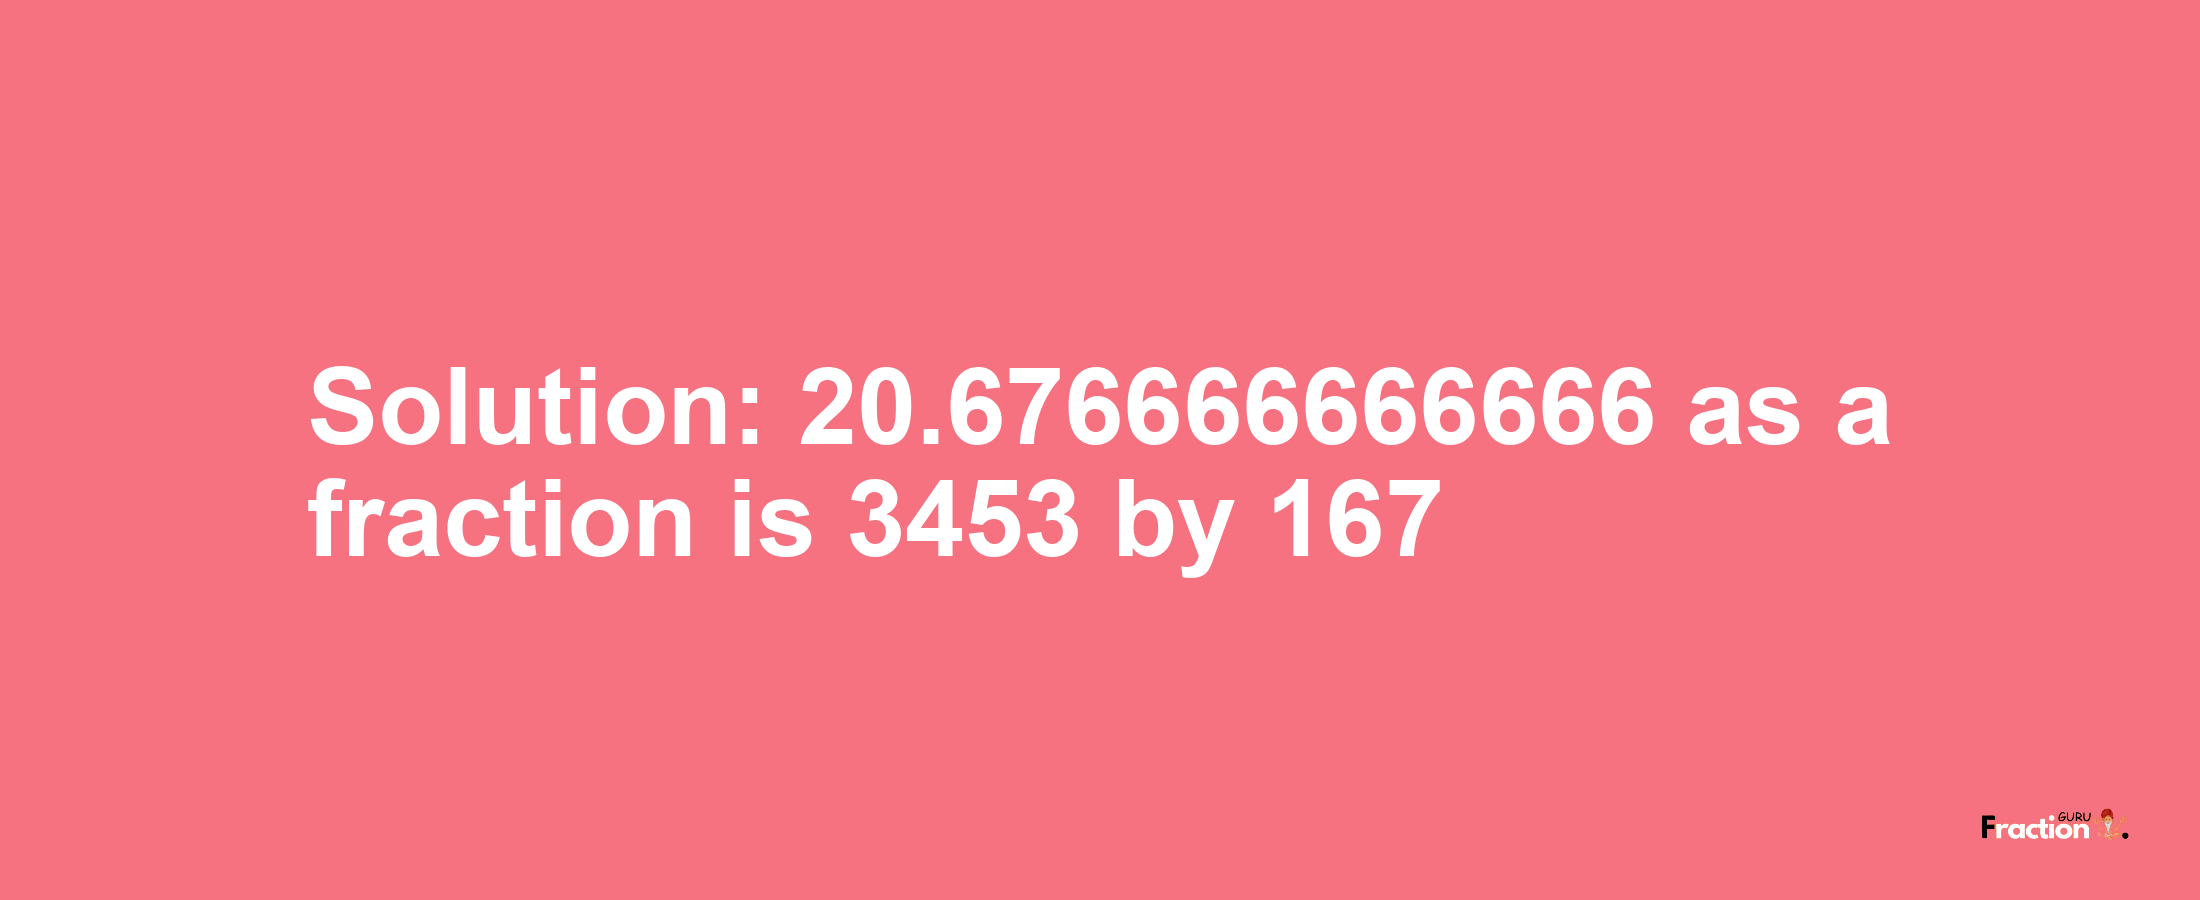 Solution:20.676666666666 as a fraction is 3453/167